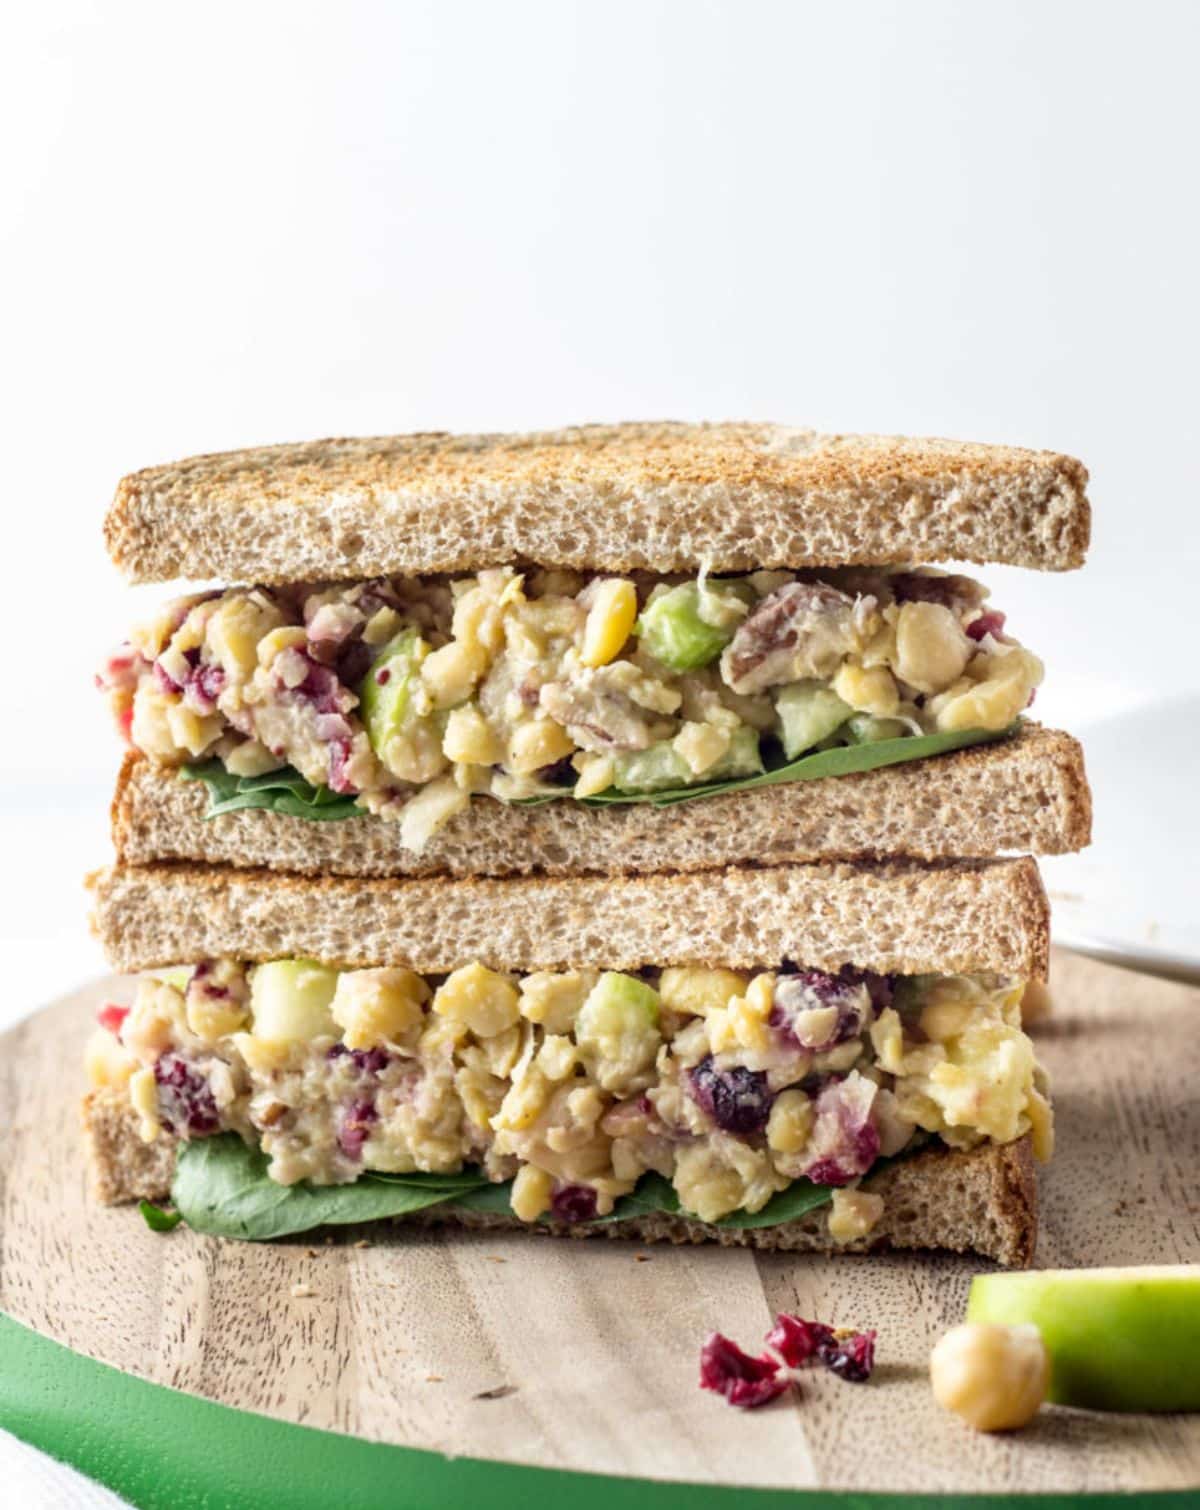 Cranberry Apple Chickpea Salad Sandwich on a wooden cutting board.